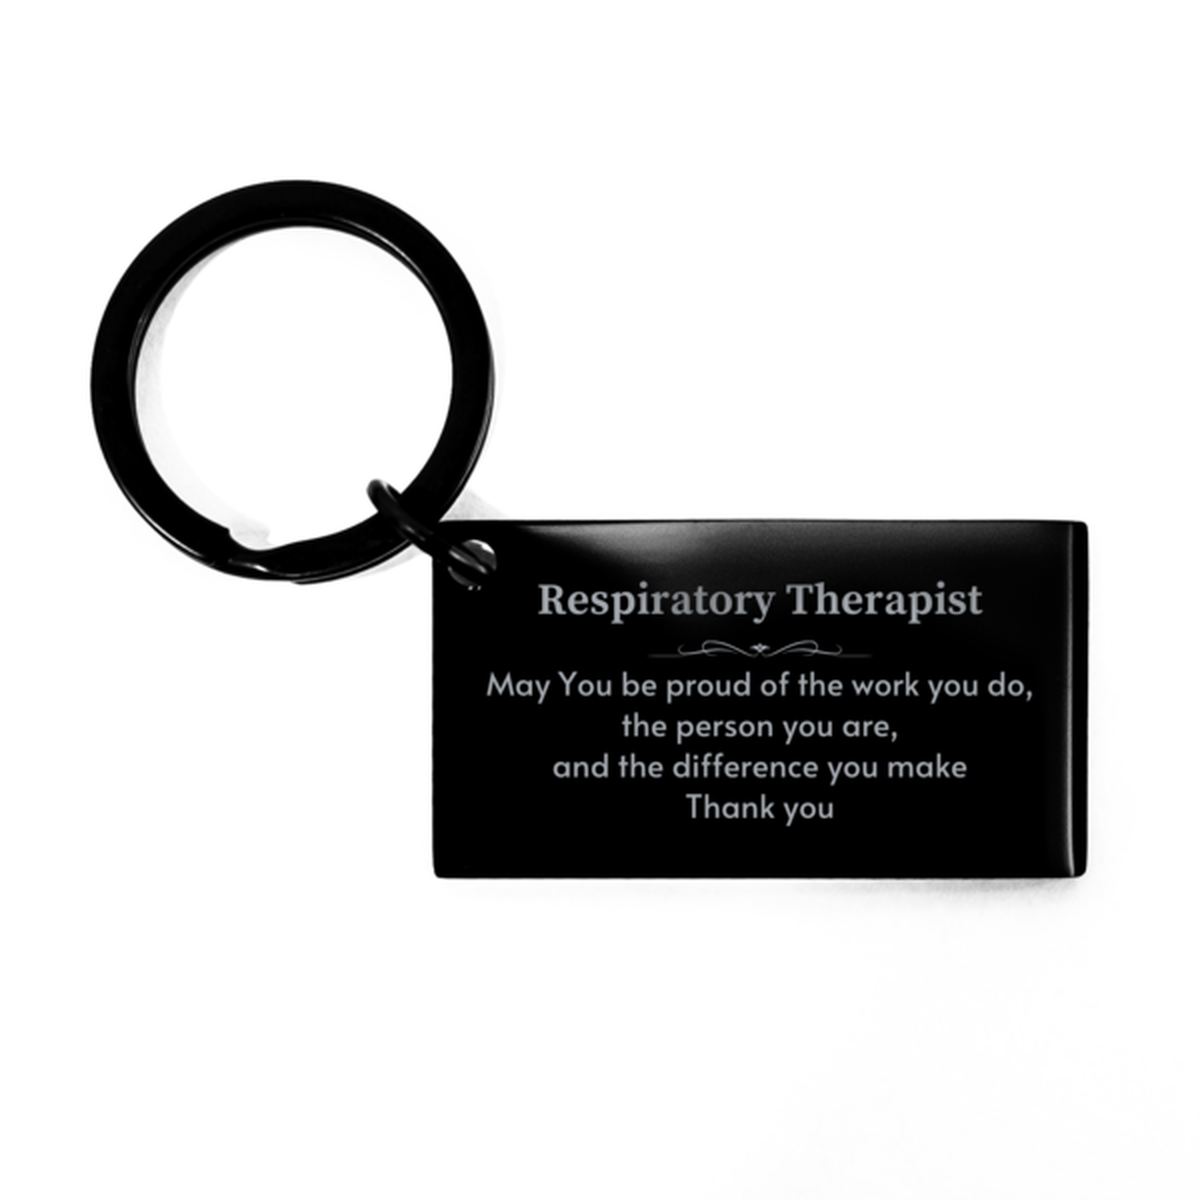 Heartwarming Keychain Retirement Coworkers Gifts for Respiratory Therapist, Teller May You be proud of the work you do, the person you are Gifts for Boss Men Women Friends